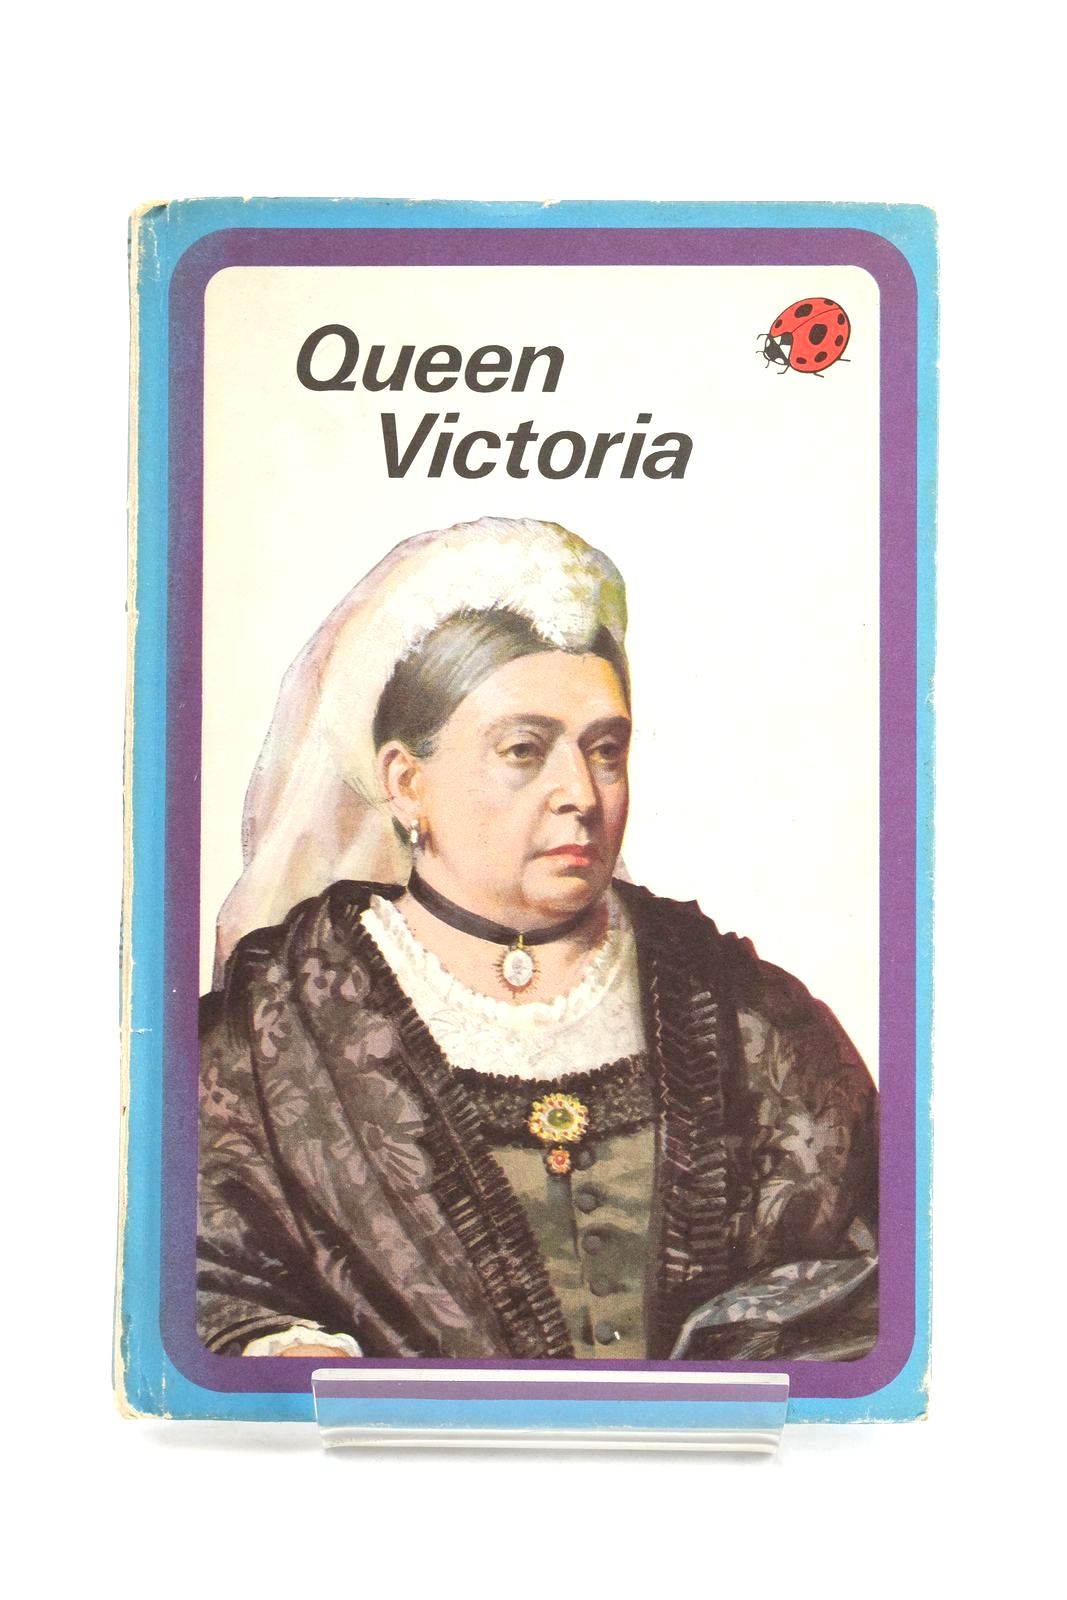 Photo of QUEEN VICTORIA written by Yglesias, J.R.C. illustrated by Hall, Roger published by Ladybird Books (STOCK CODE: 1324408)  for sale by Stella & Rose's Books